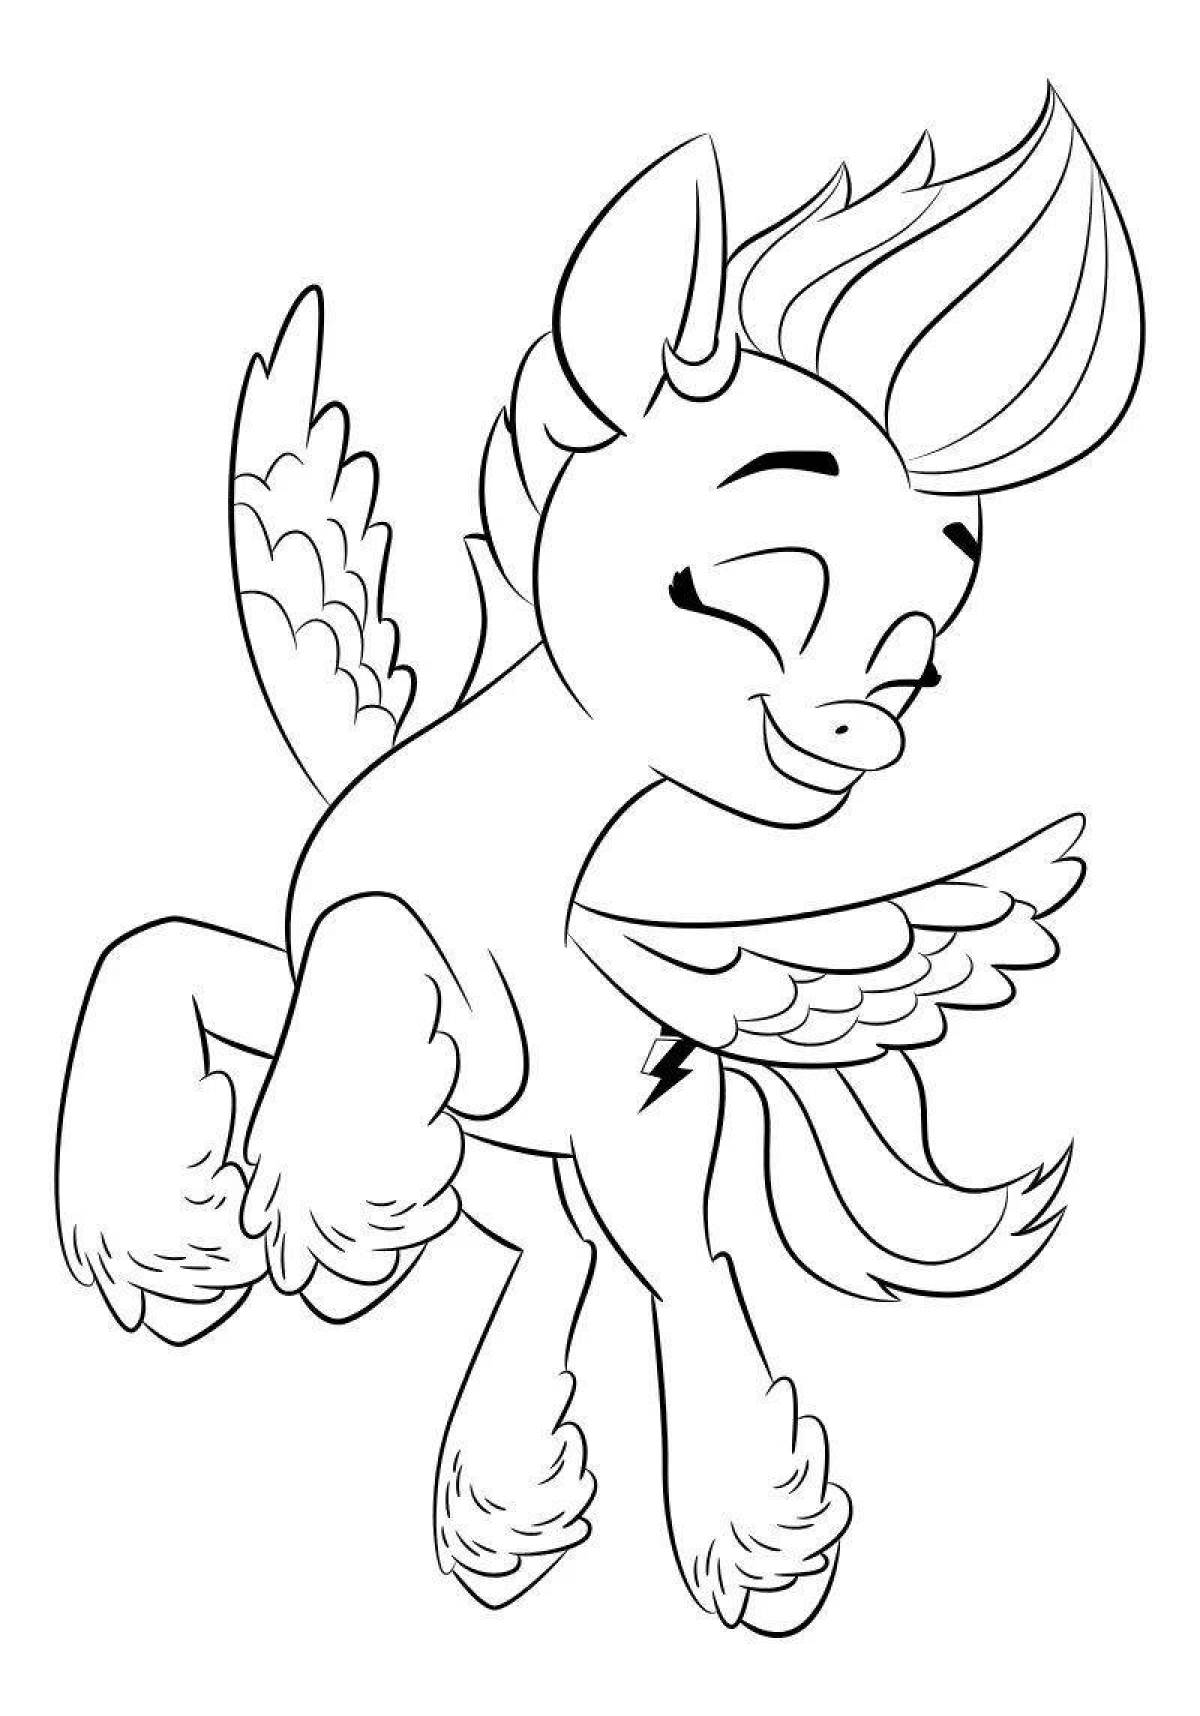 Charming pip pony coloring book